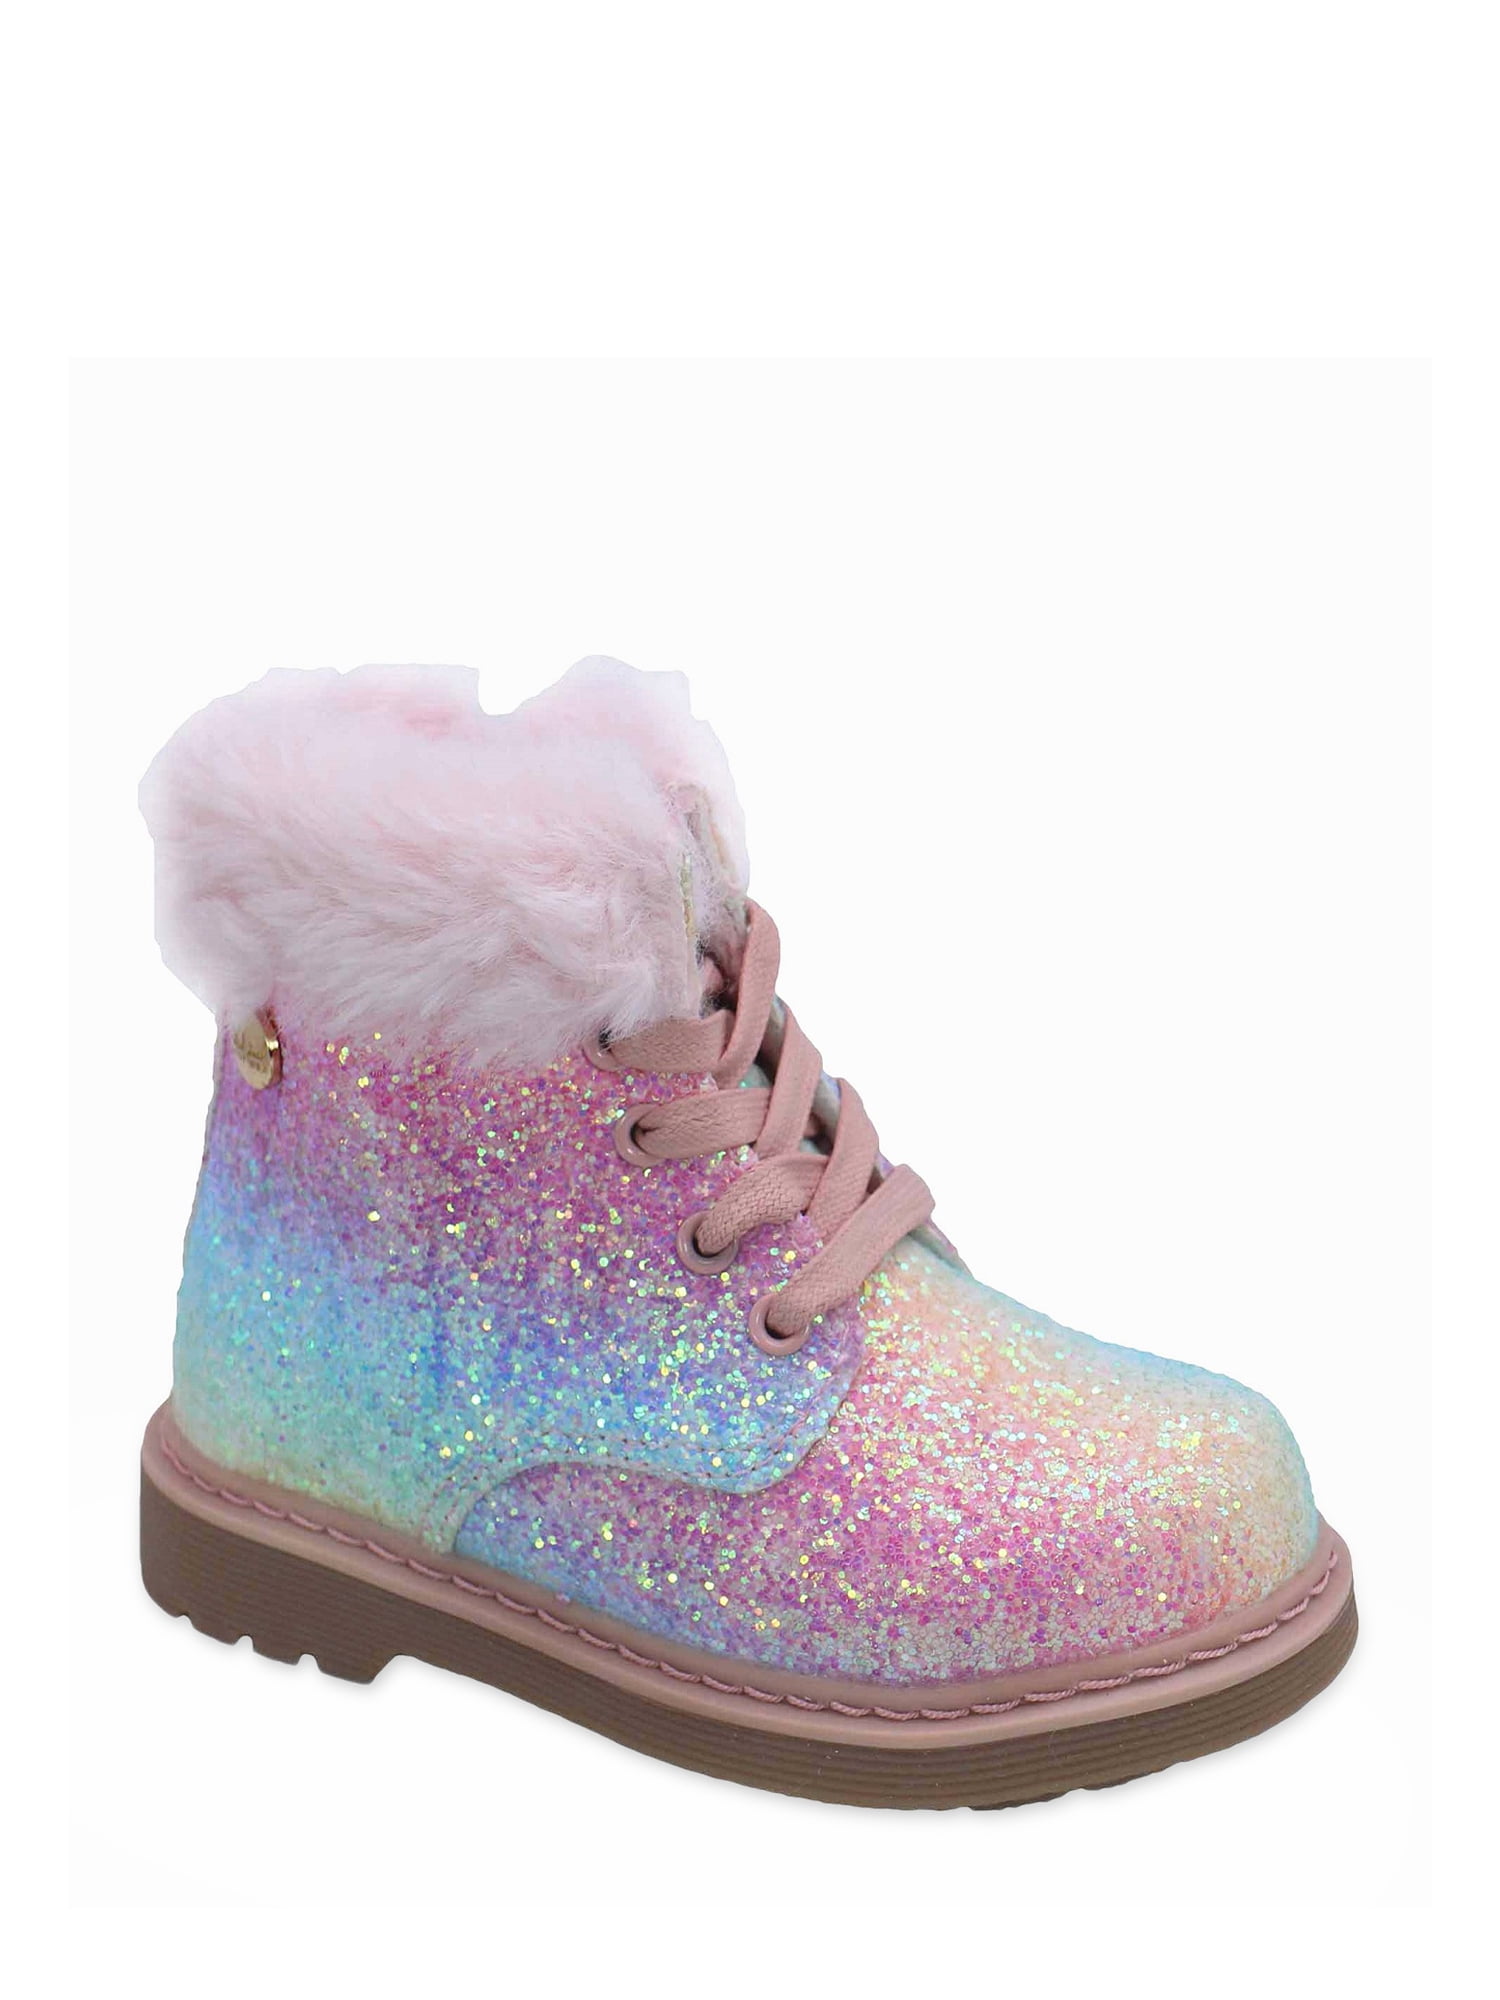 SIZE 11,12,13,1,2,3,4,5 Details about   NEW ARRIVALS GIRLS PINK SEQUIN DUCK BOOTS 